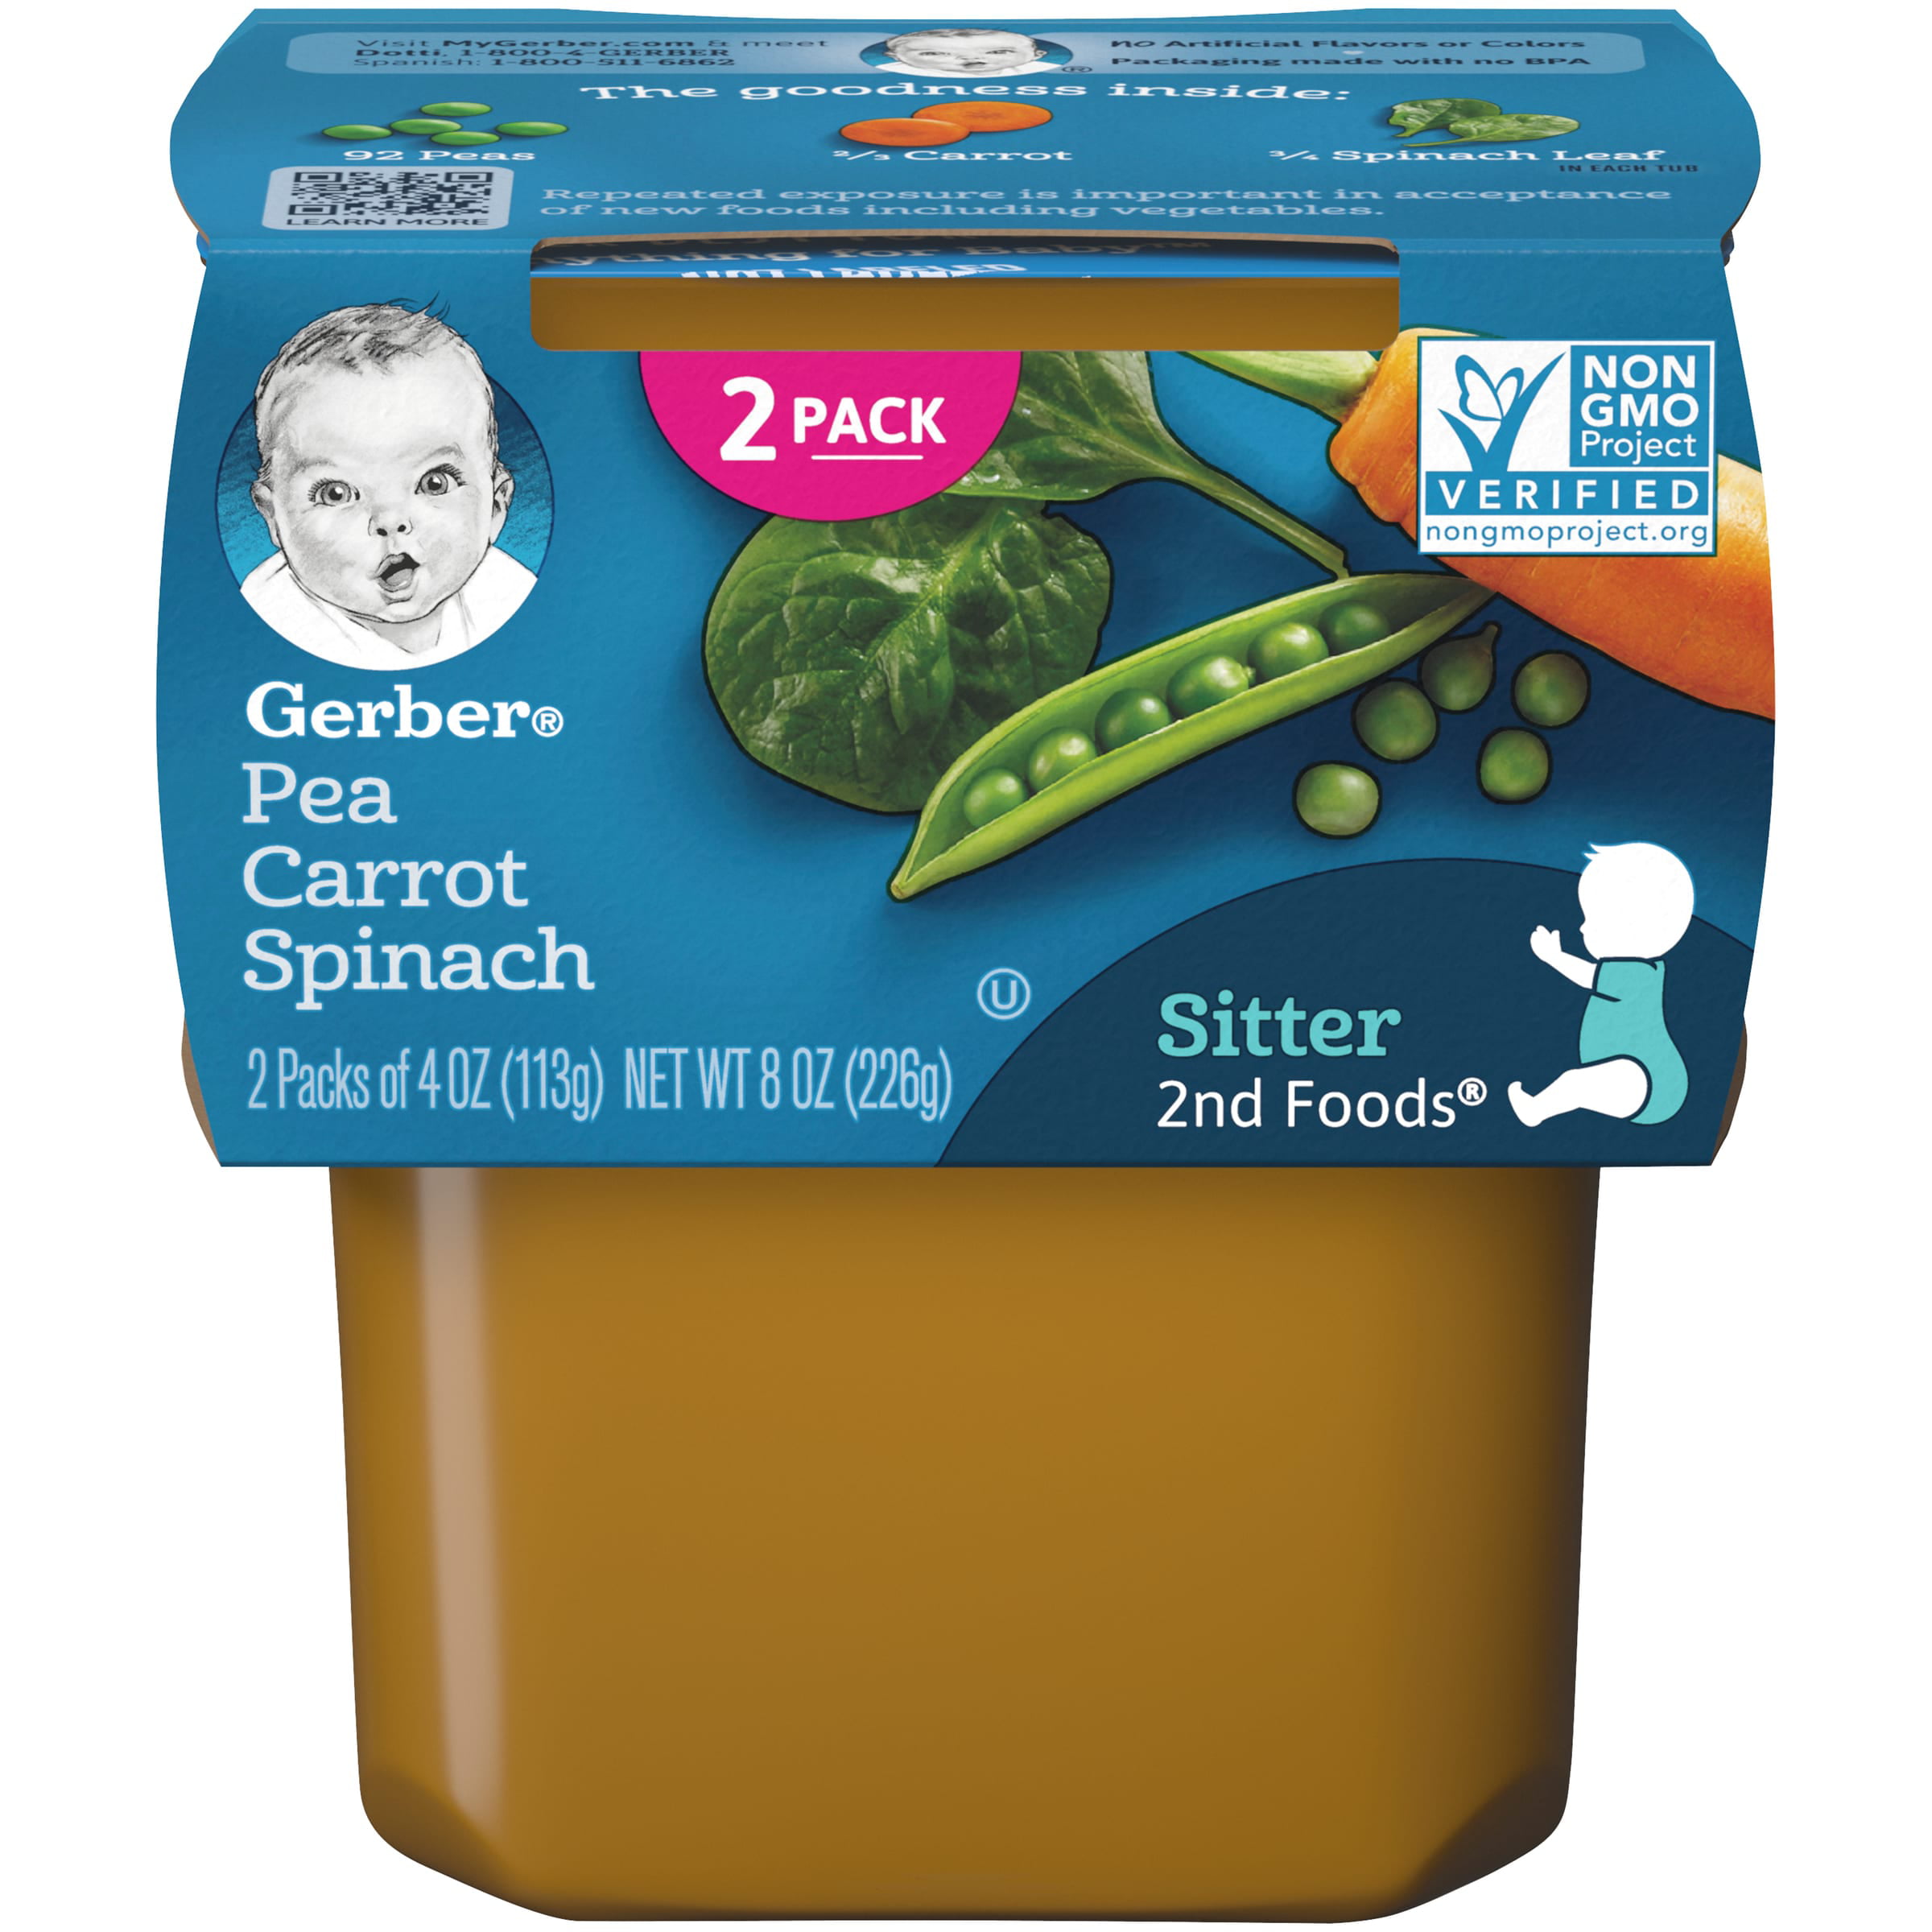 (2 Pack) Gerber Natural Stage 2, Pea Carrot Spinach Baby Food, 1 Tub